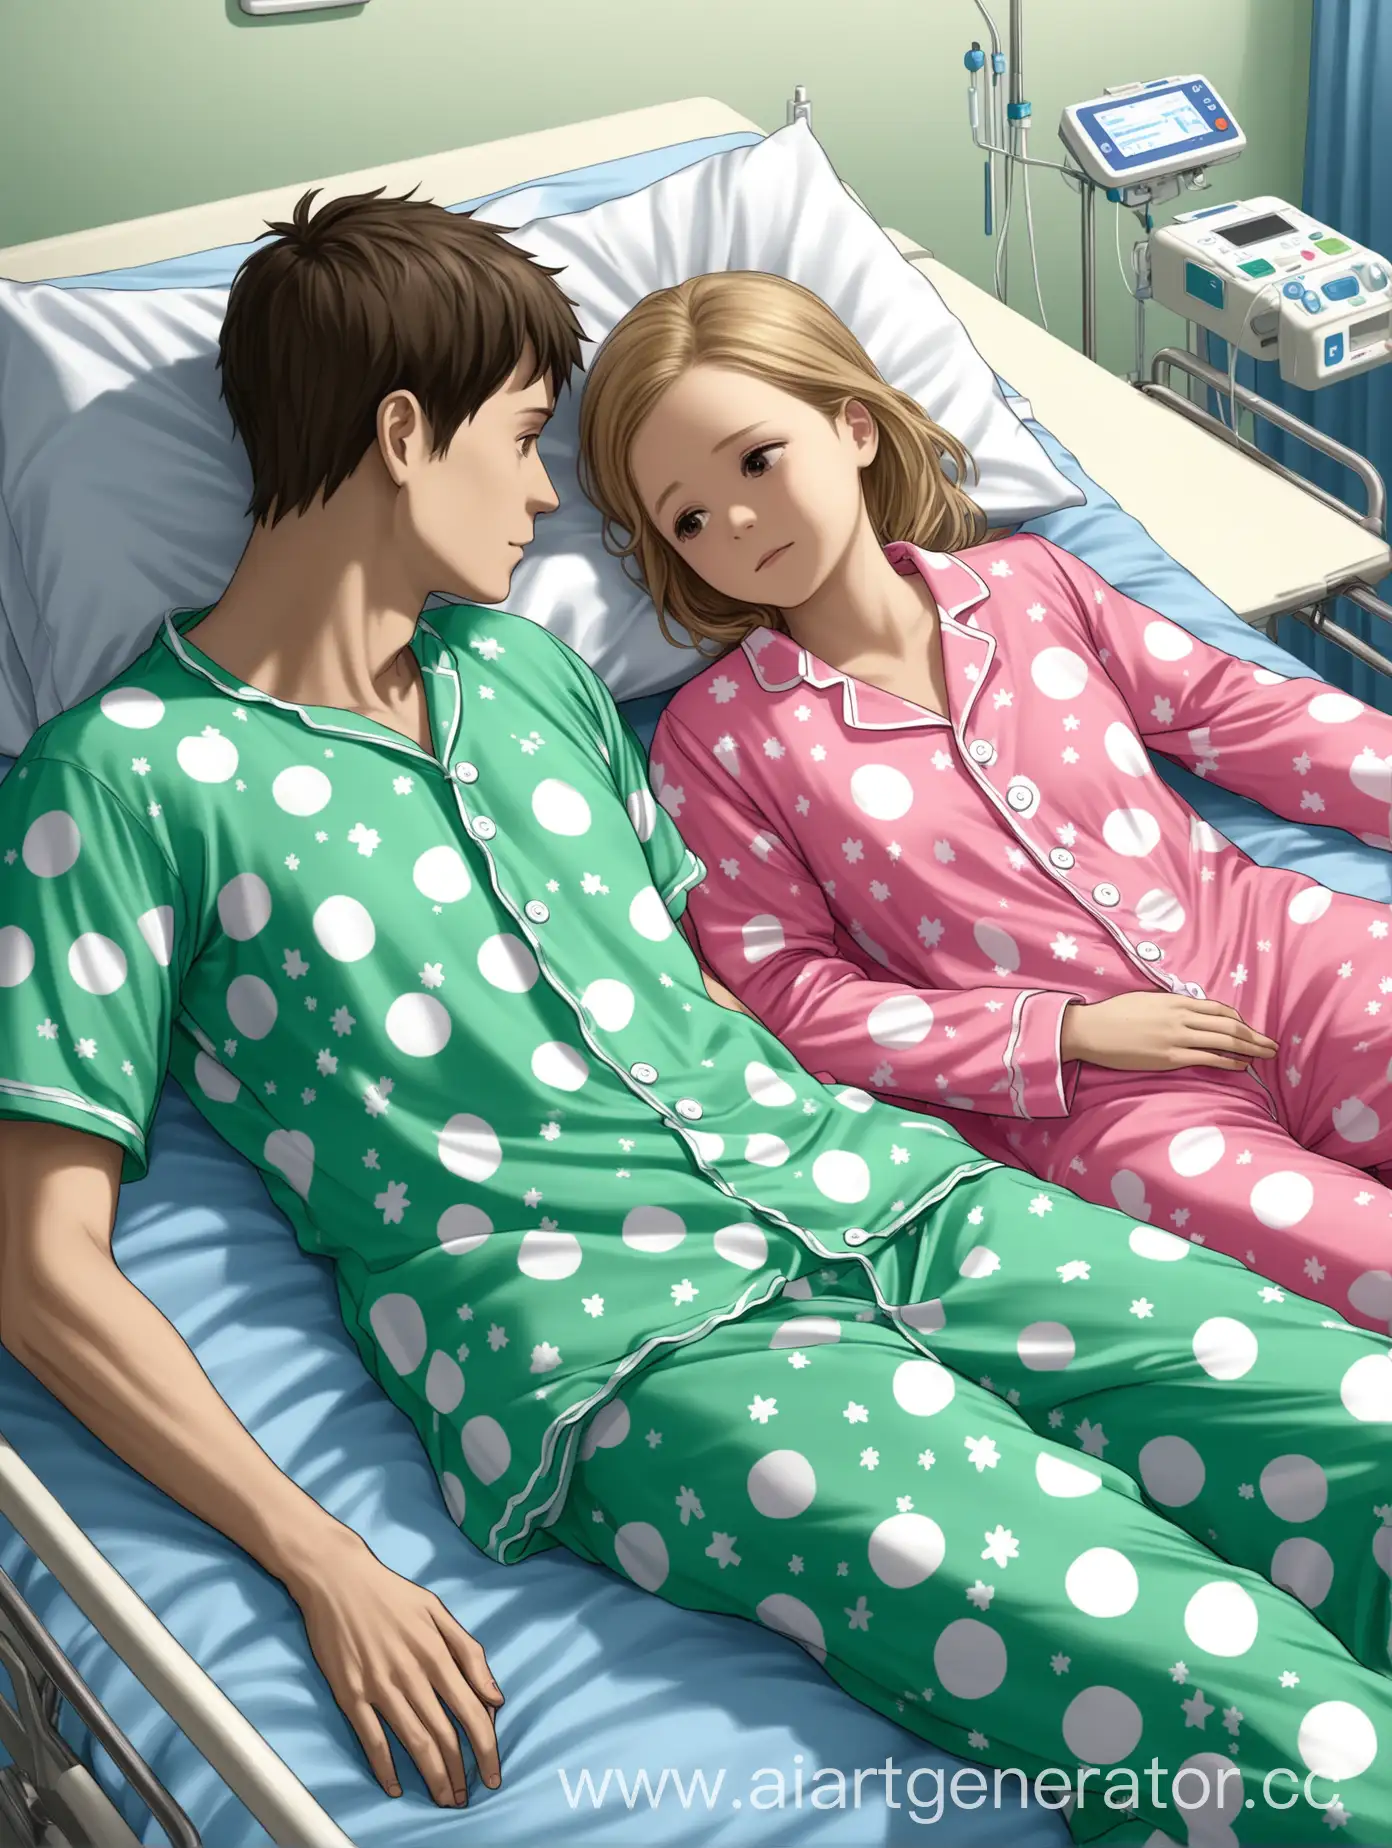 Girl-and-Boy-in-Colored-Pajamas-Resting-in-Hospital-Room